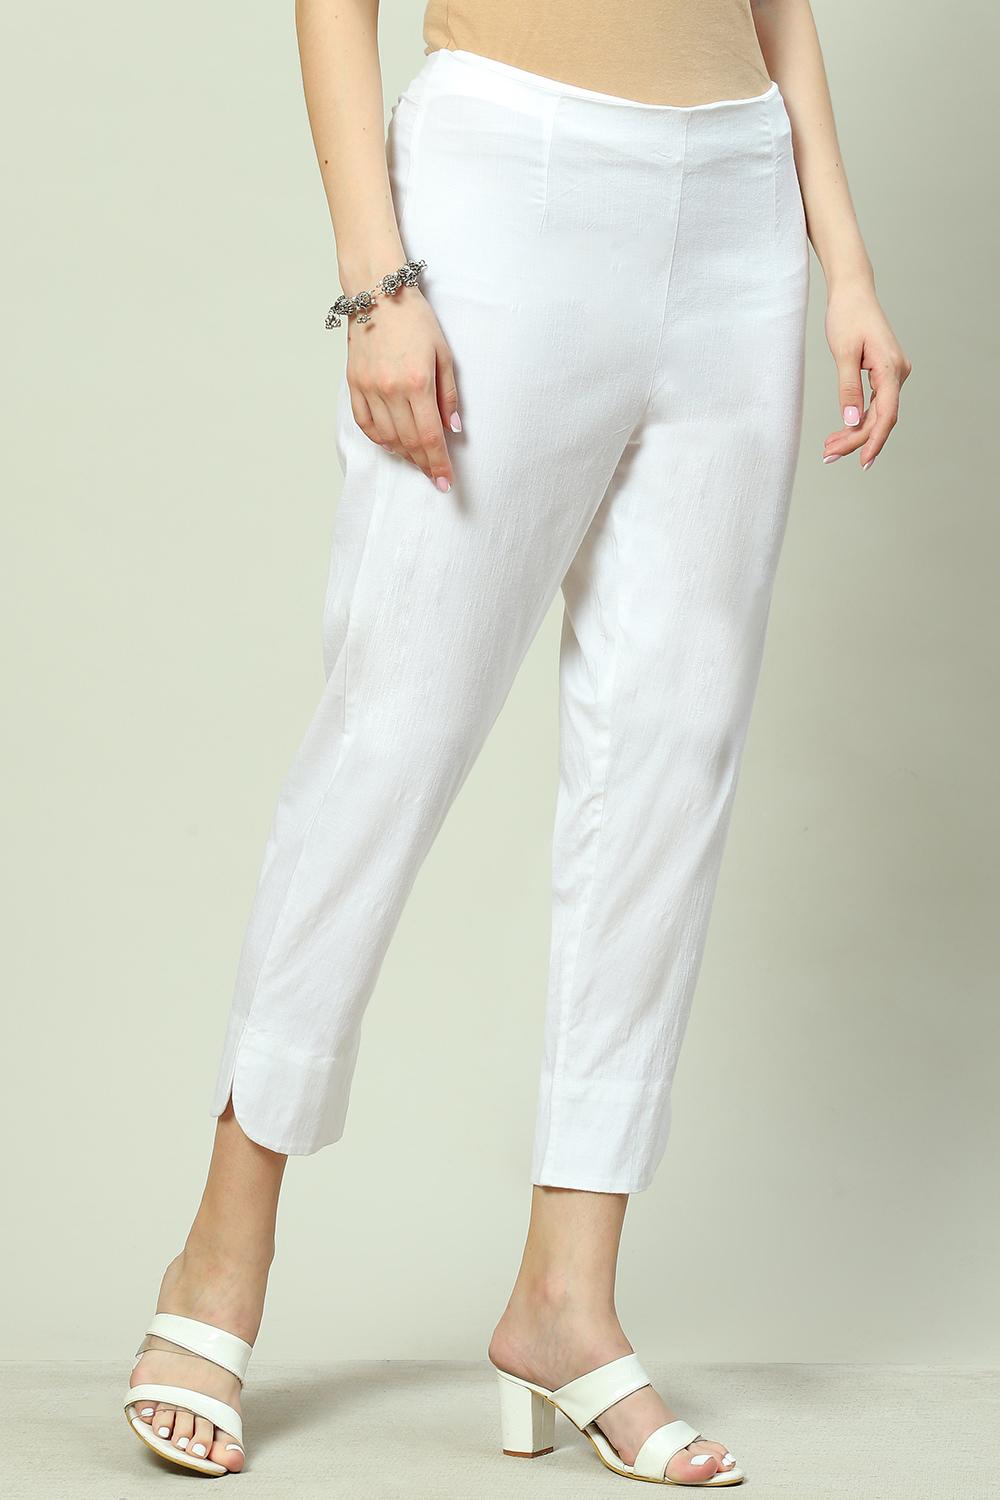 Buy Online White Viscose & Lycra Pants for Women & Girls at Best Prices ...